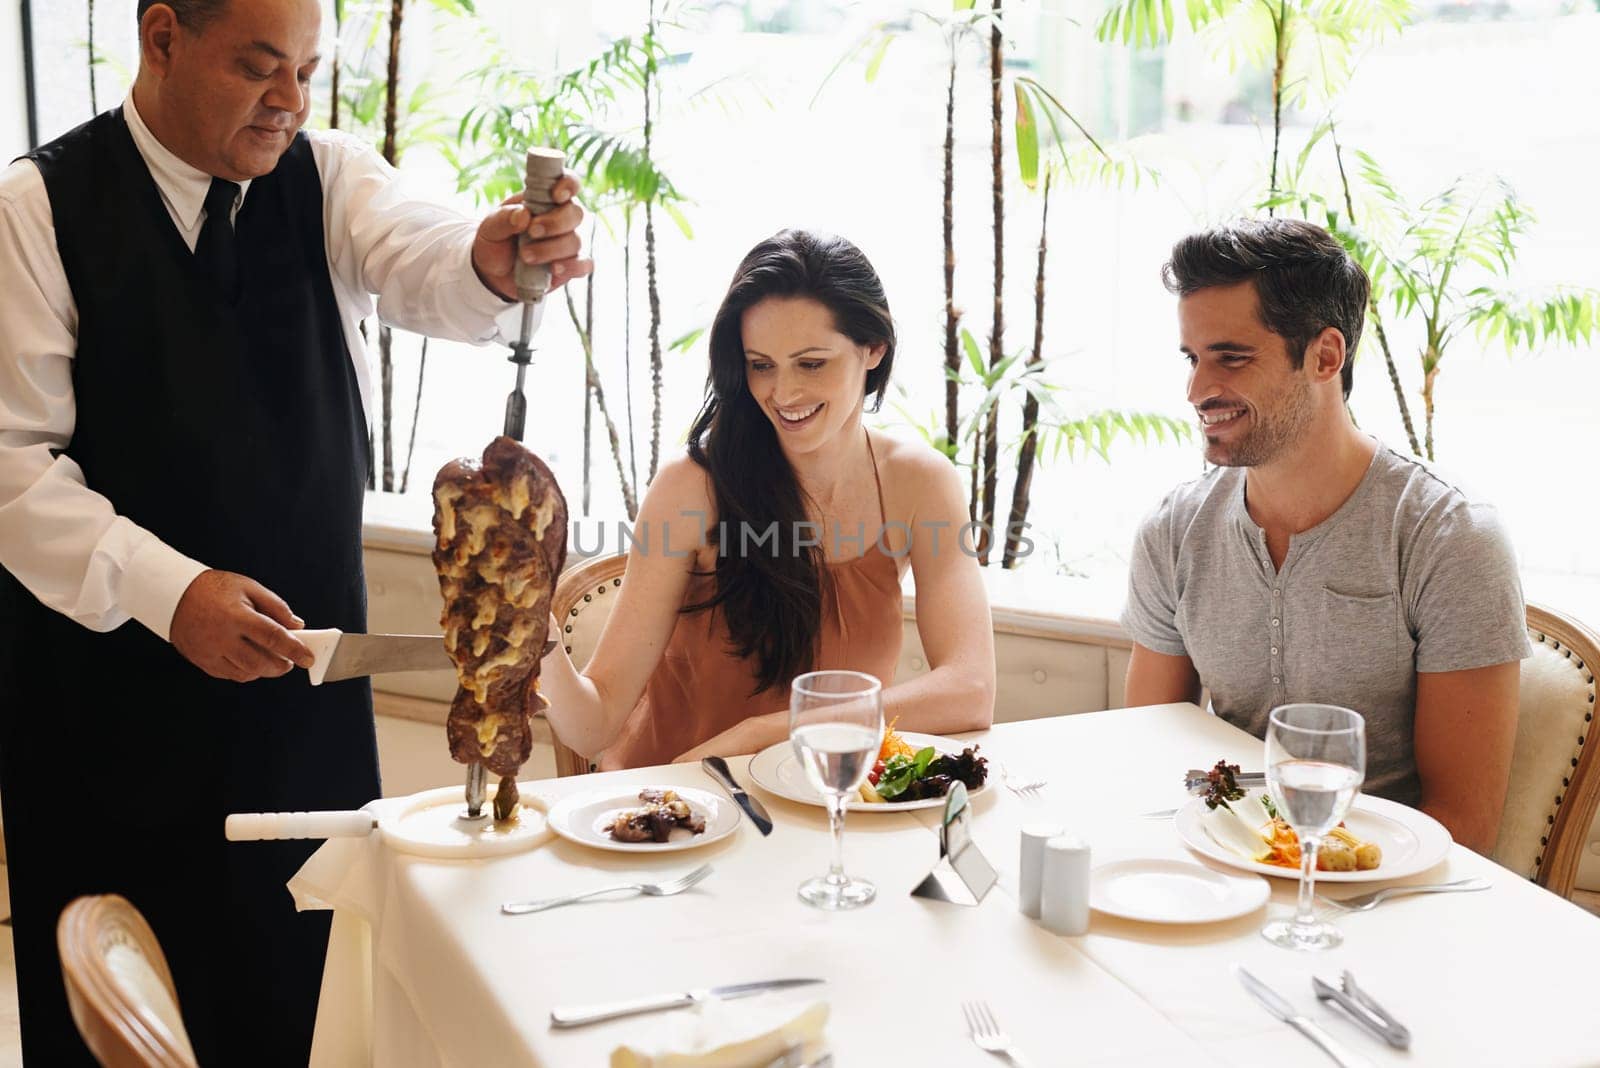 Happy couple, date and waiter with meat kebab for serving, fine dinning or romantic dinner at table. Young man and woman enjoying chef cutting skewer of food for meal, eating or service at restaurant.